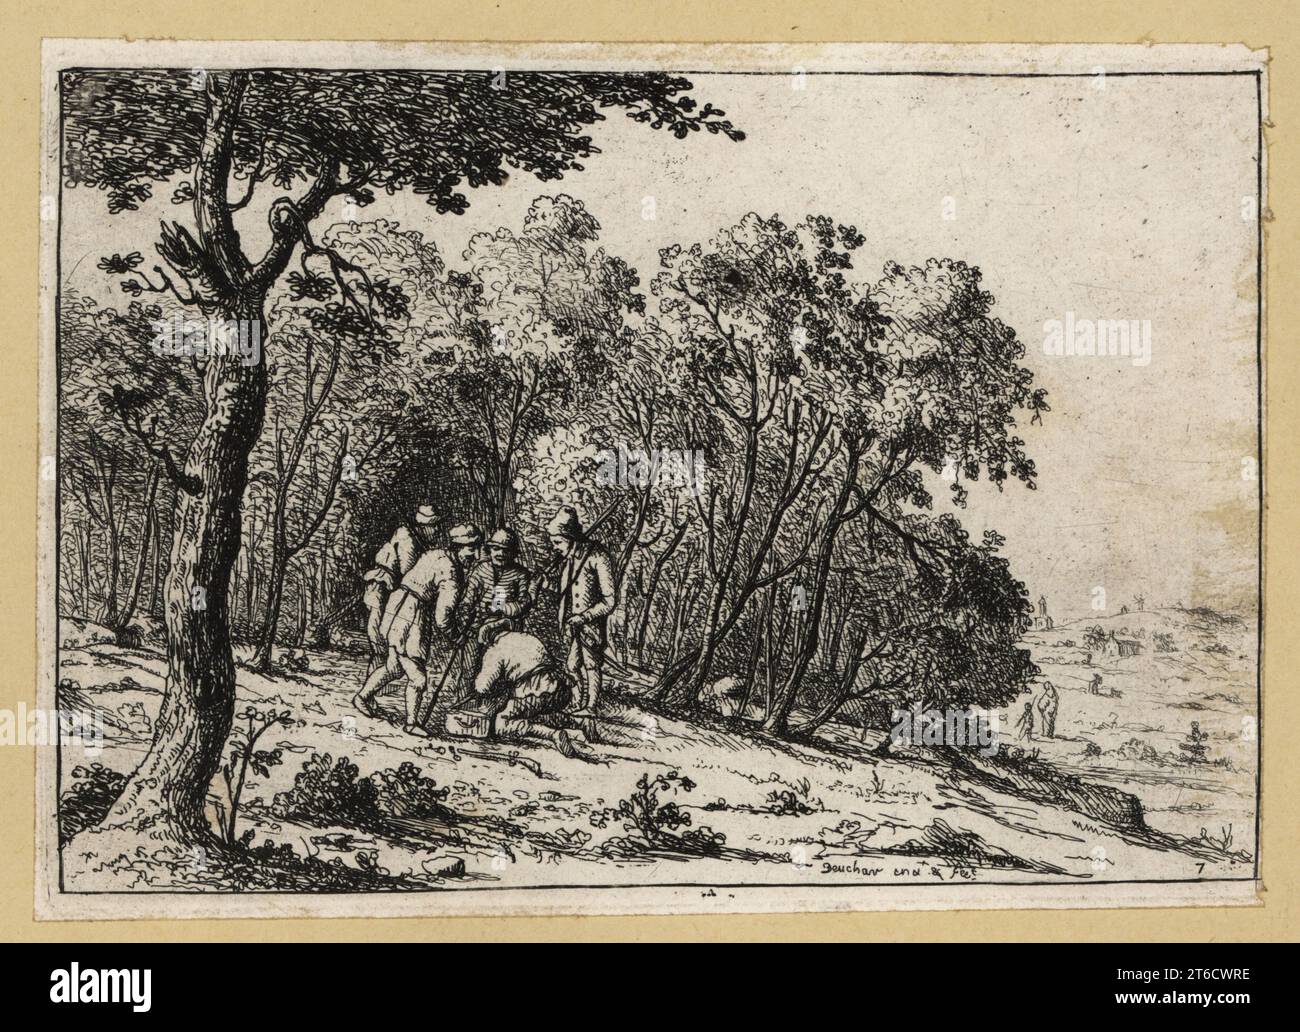 17th century highwaymen sharing loot in a clearing. They are armed with swords and muskets. Bandits in the woods. Copperplate engraving by David Deuchar from A Collection of Etchings after the most Eminent Masters of the Dutch and Flemish Schools, Edinburgh, 1803. Stock Photo